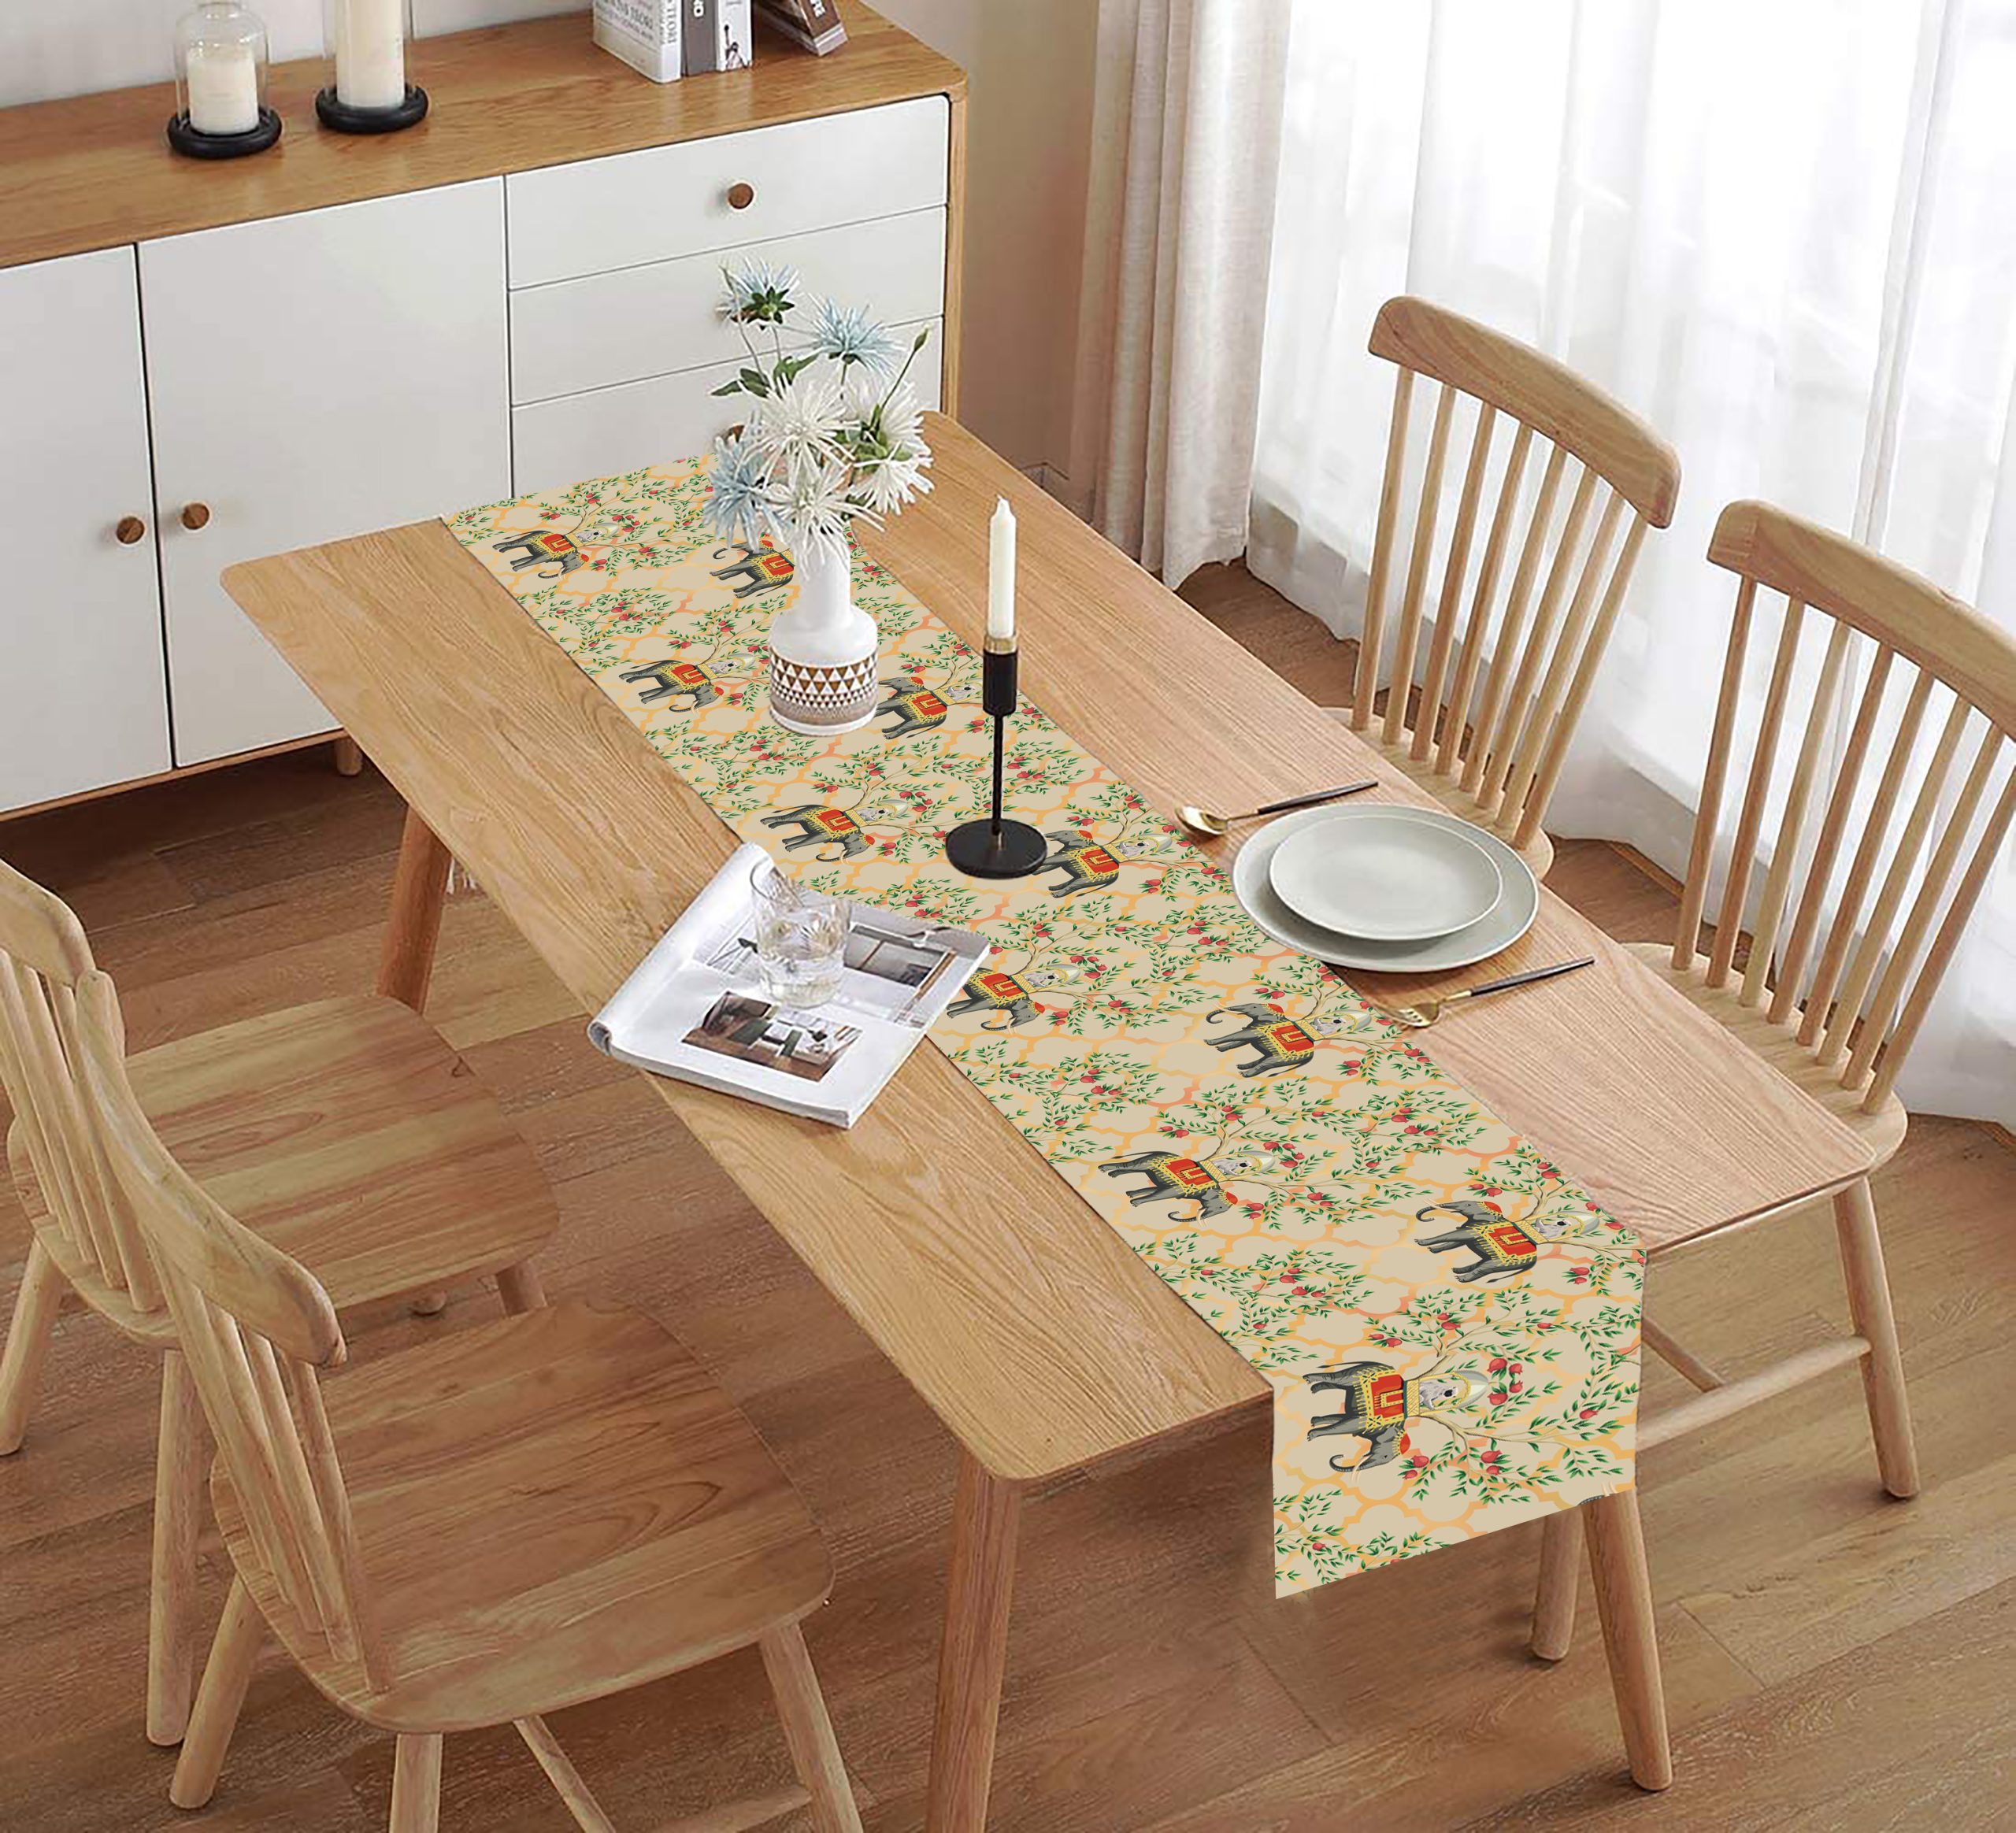 Homewards Beige Decorated Elephant and Monkey Printed Polycanvas Table Runner